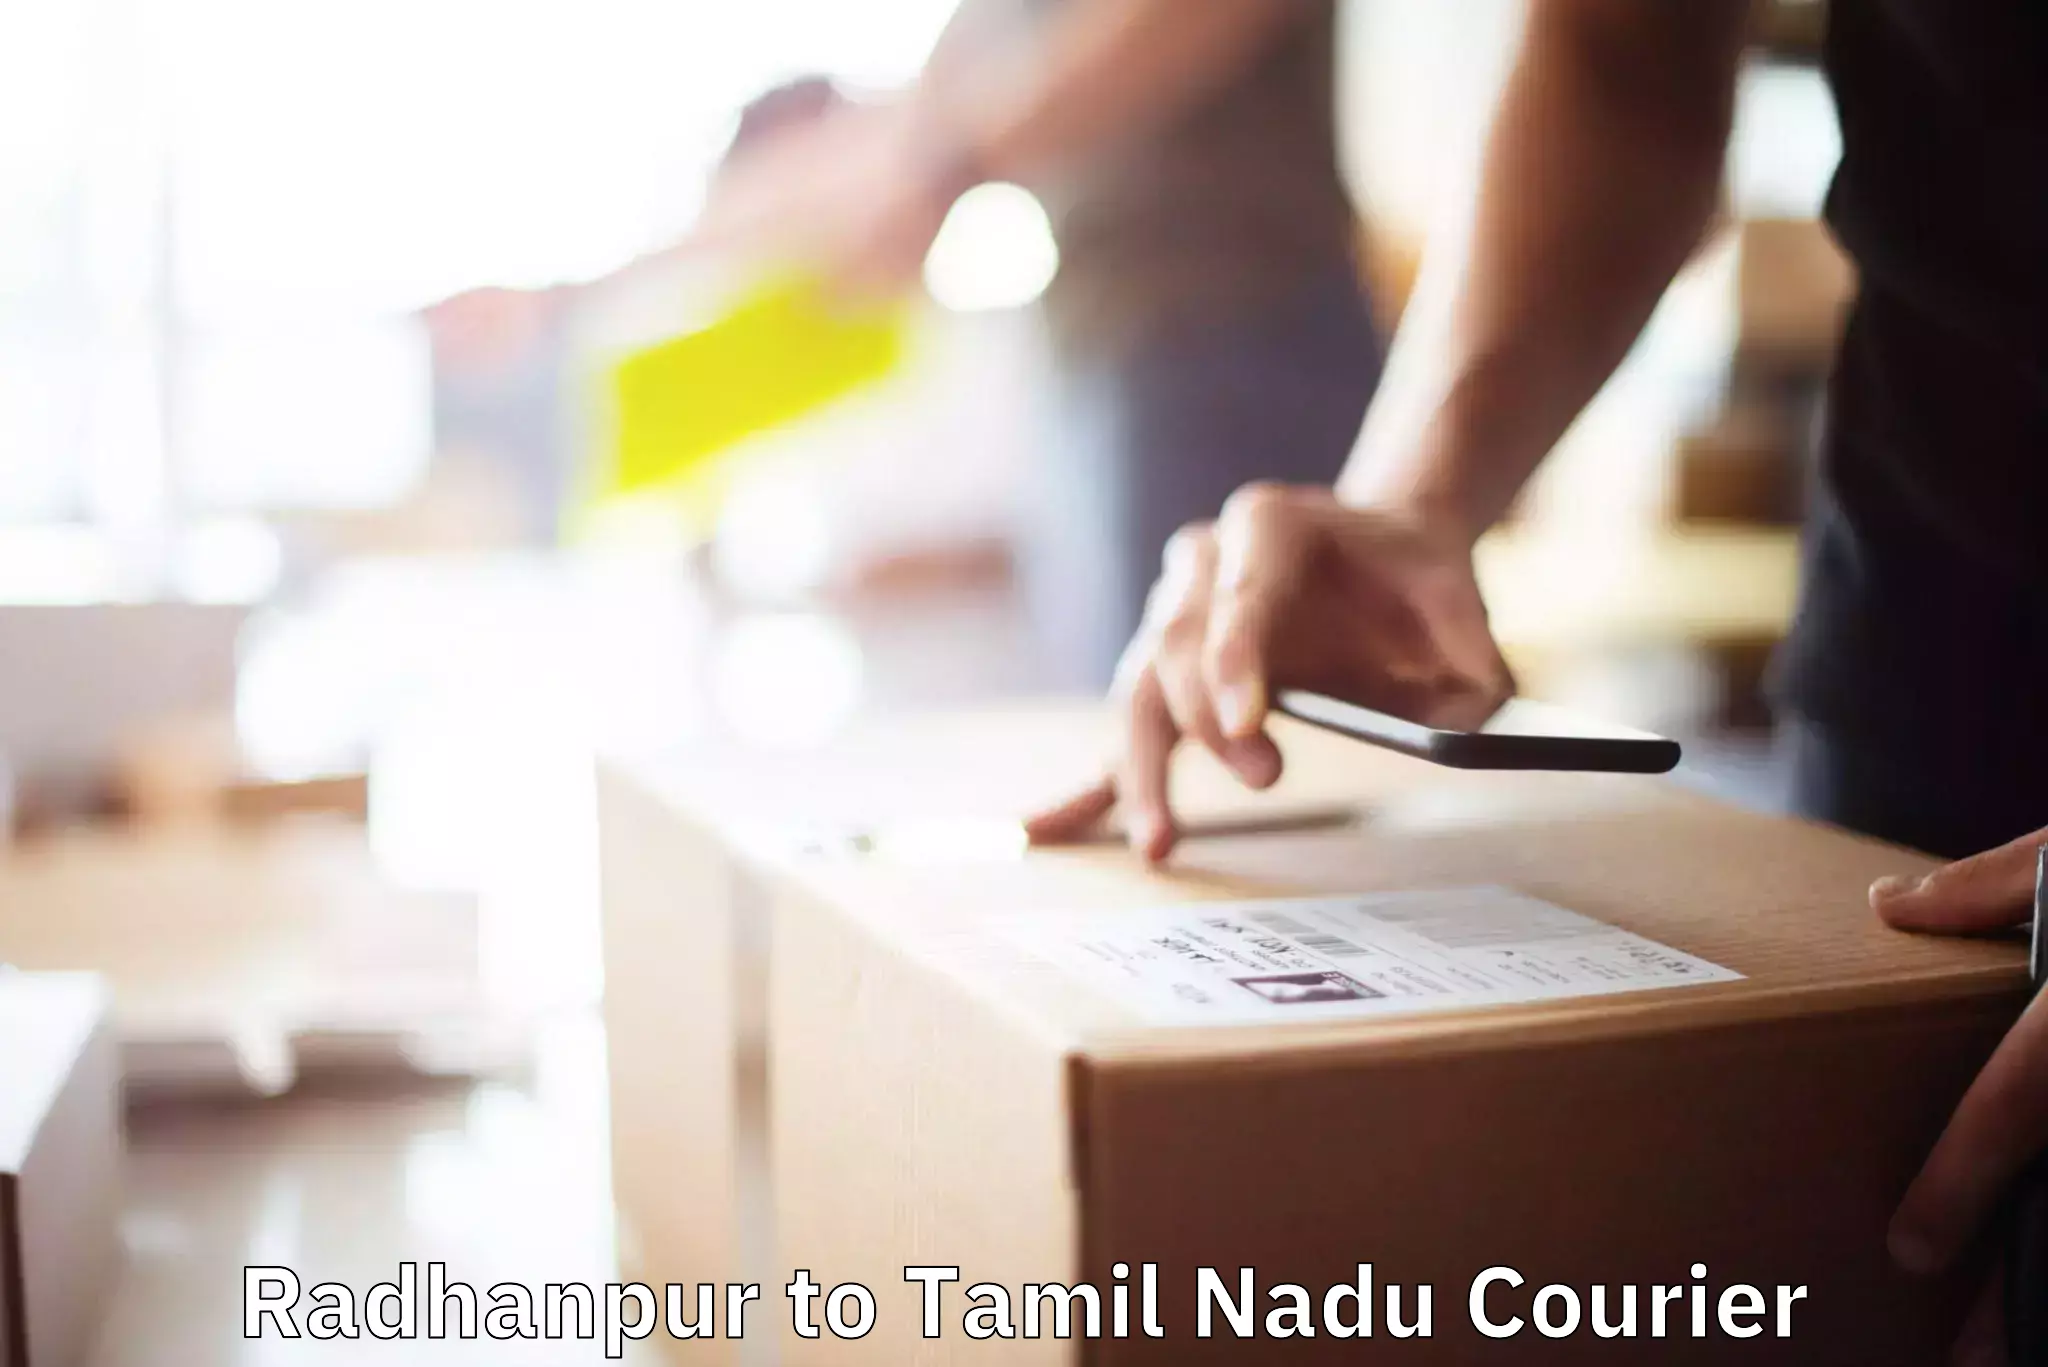 Full-service movers Radhanpur to Tamil Nadu